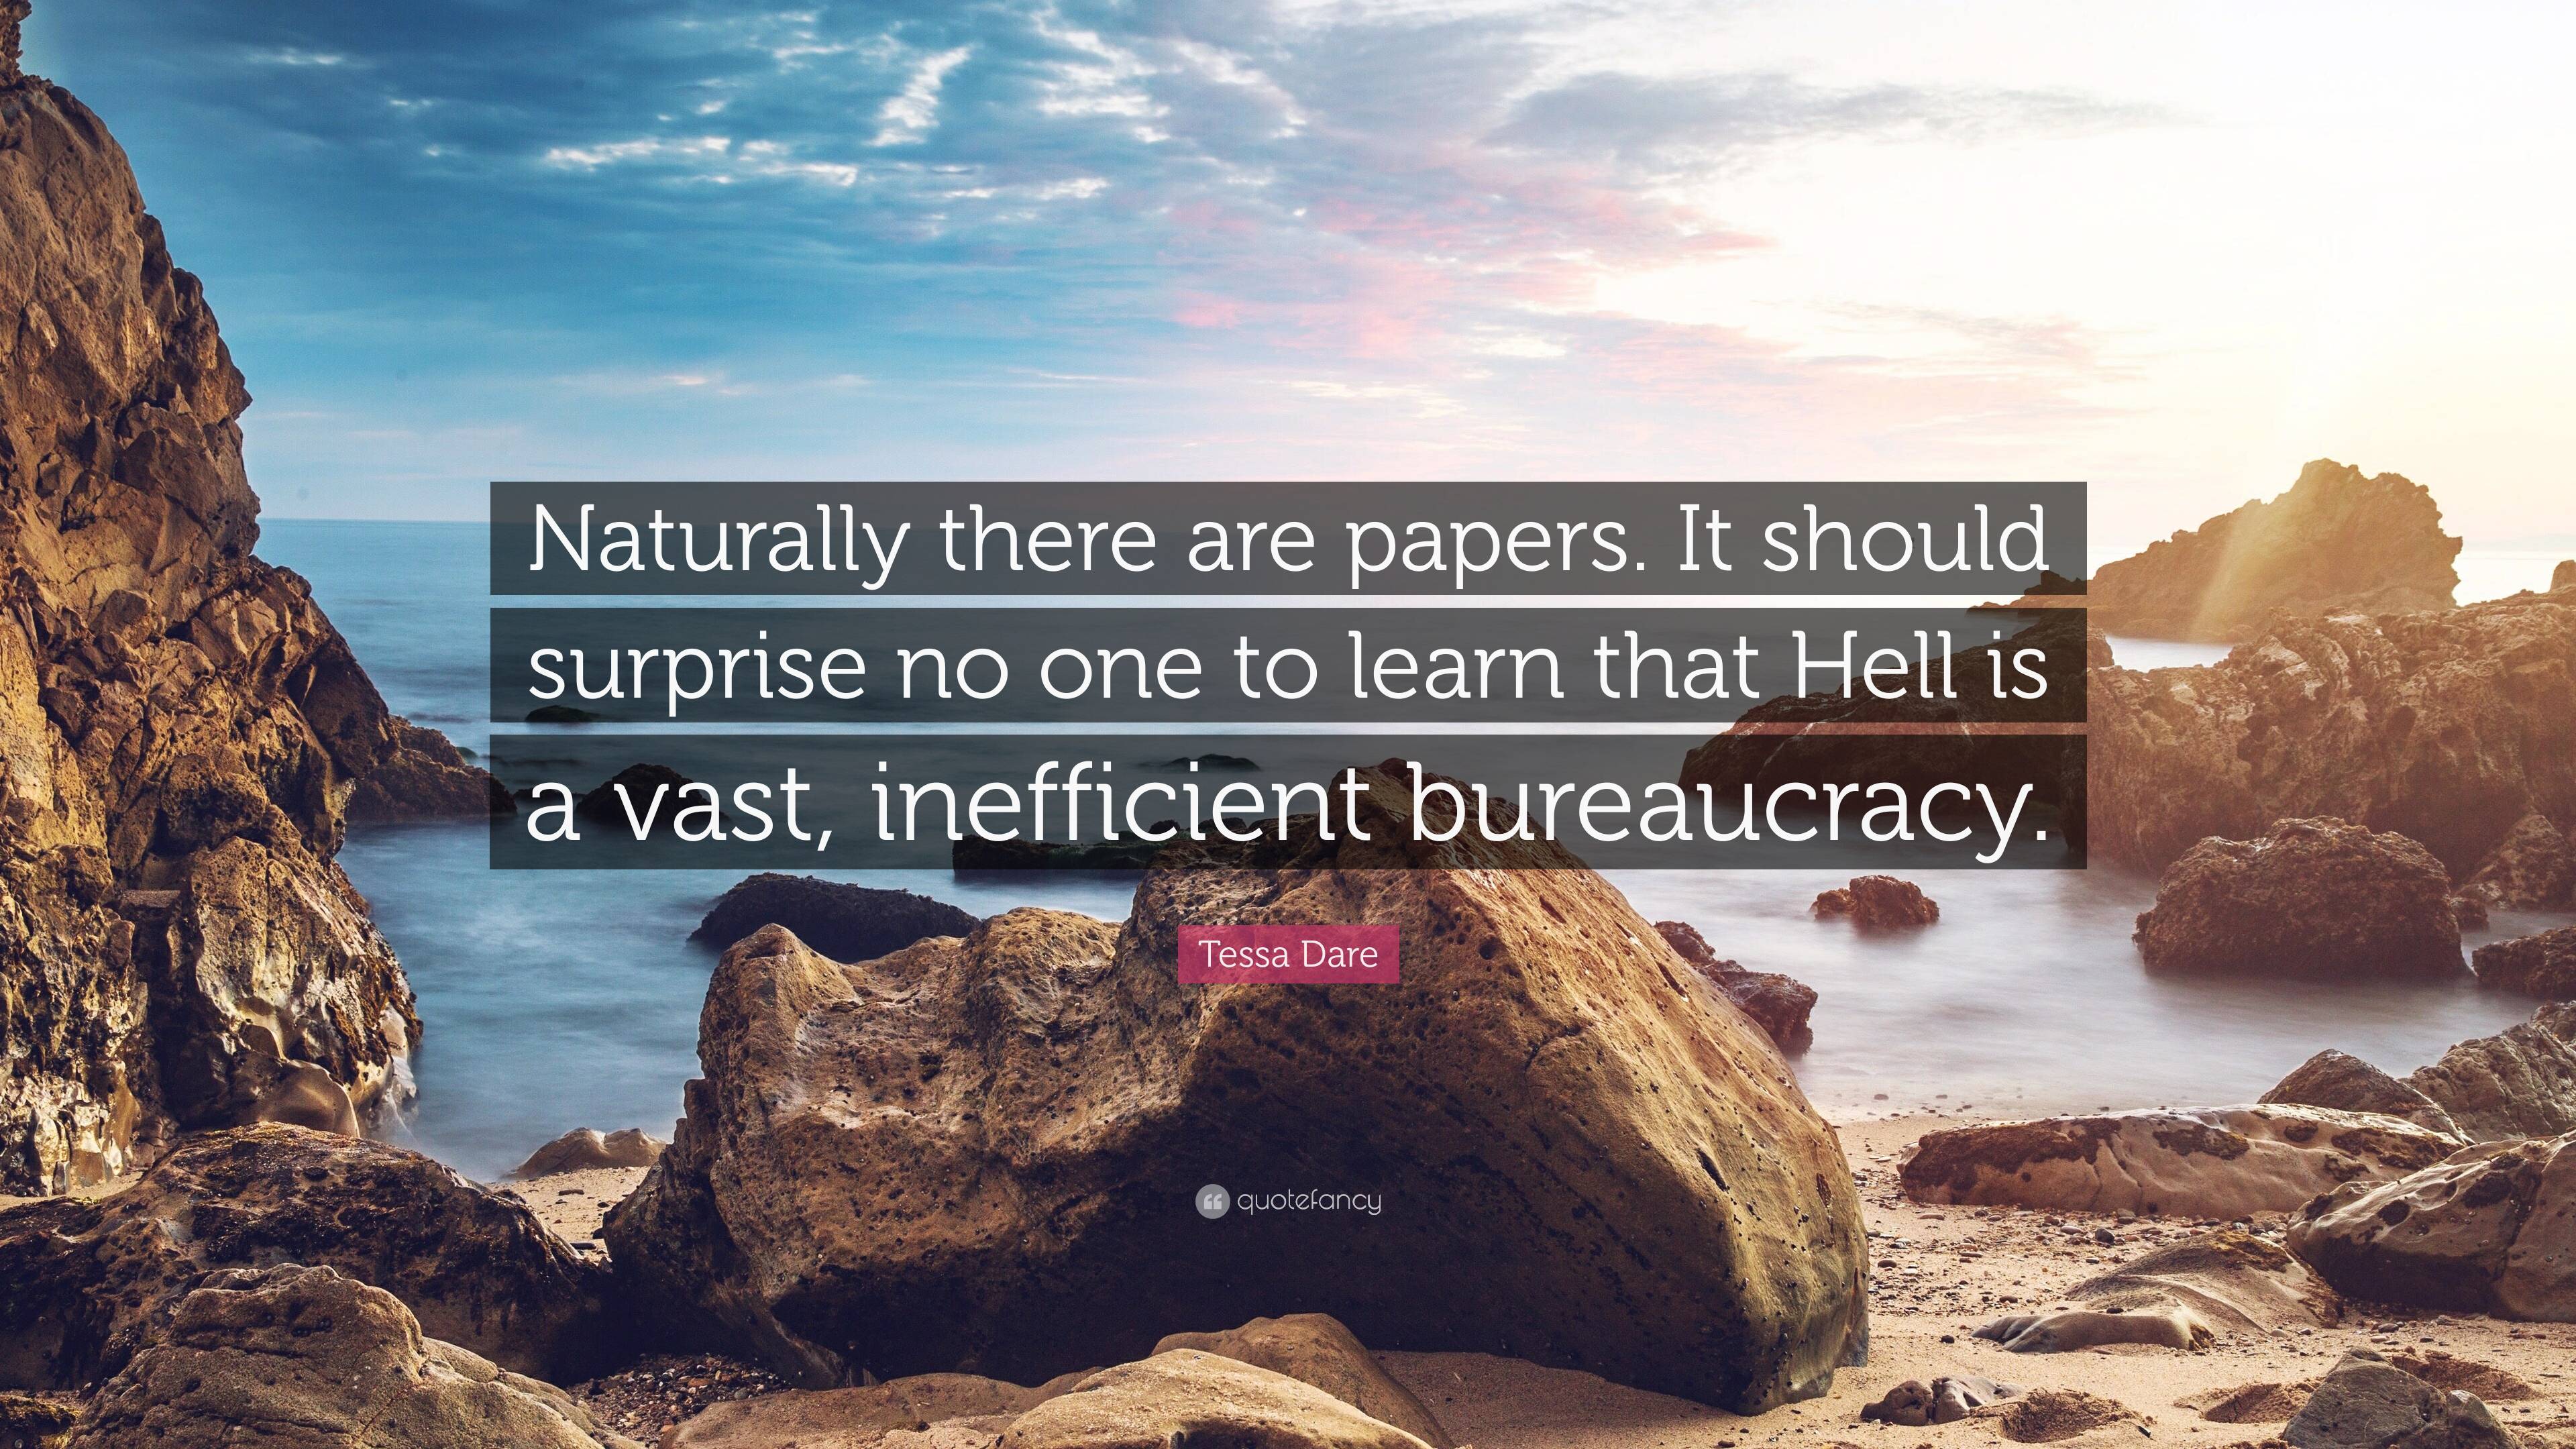 Tessa Dare Quote: “Naturally there are papers. It should surprise no ...